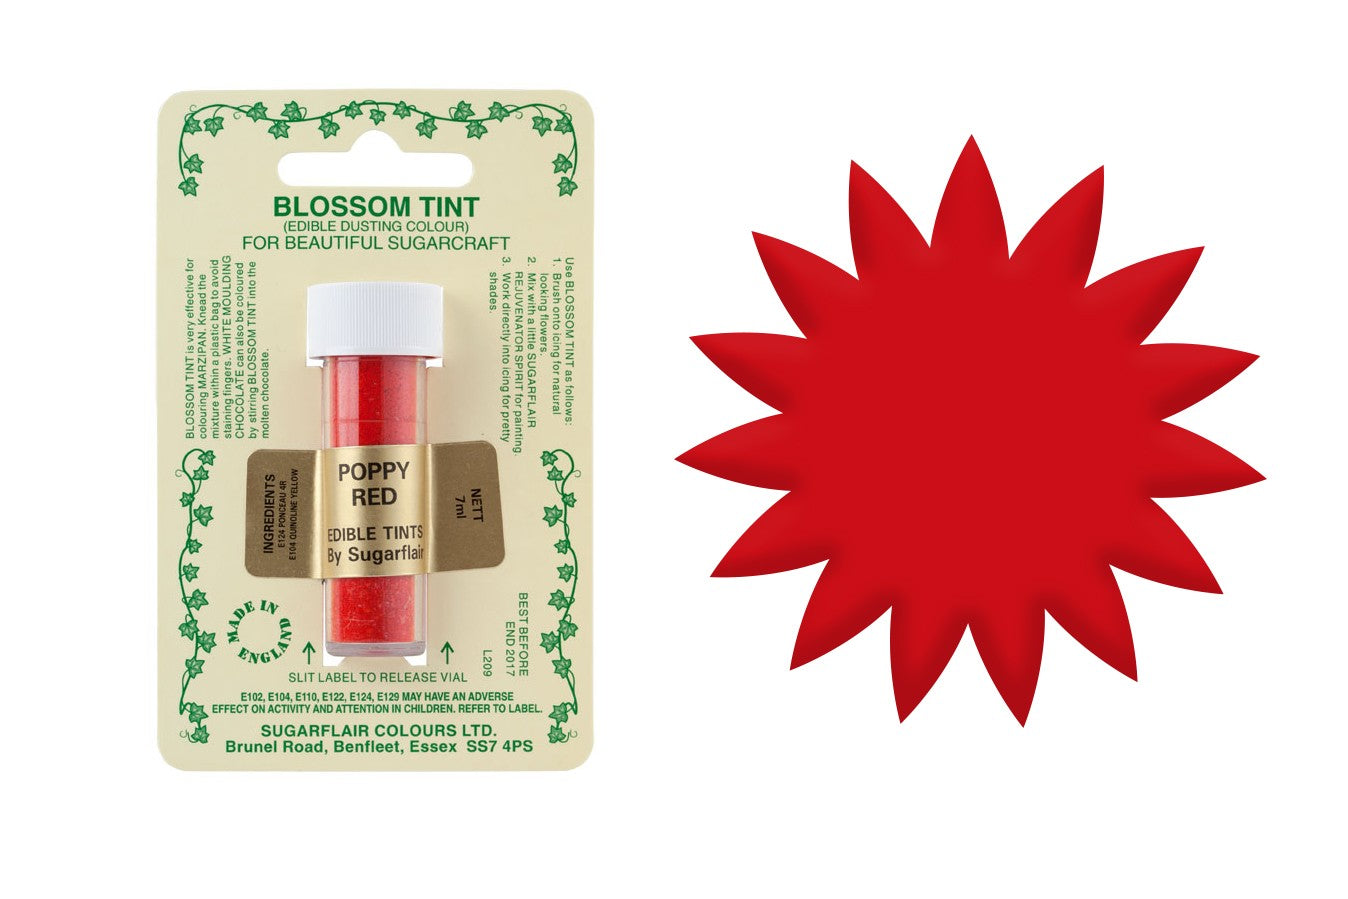 Sugarflair Blossom Tint Poppy Red - The Cooks Cupboard Ltd